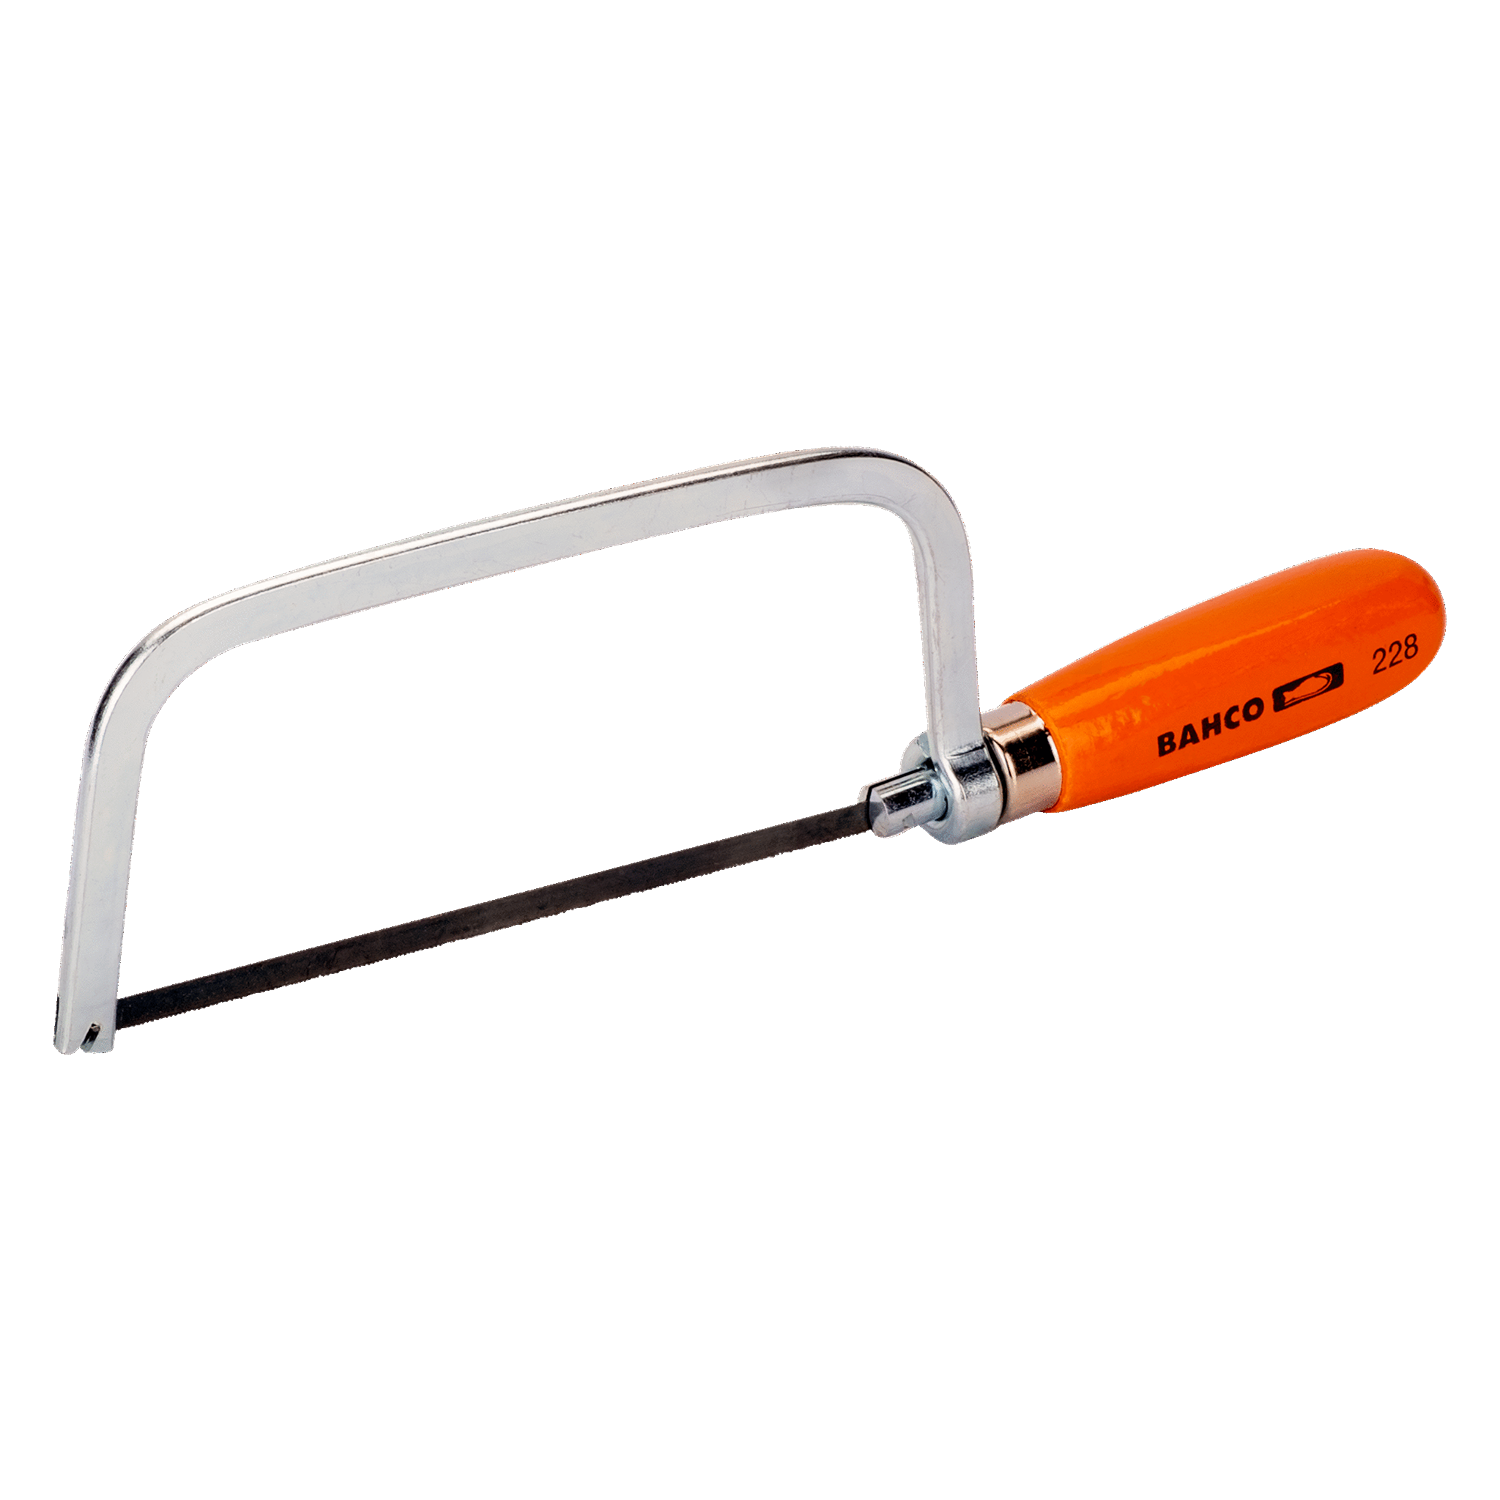 BAHCO 228 Junior Hacksaw Frame with Steel Profile 150 mm - Premium Junior Hacksaw Frame from BAHCO - Shop now at Yew Aik.